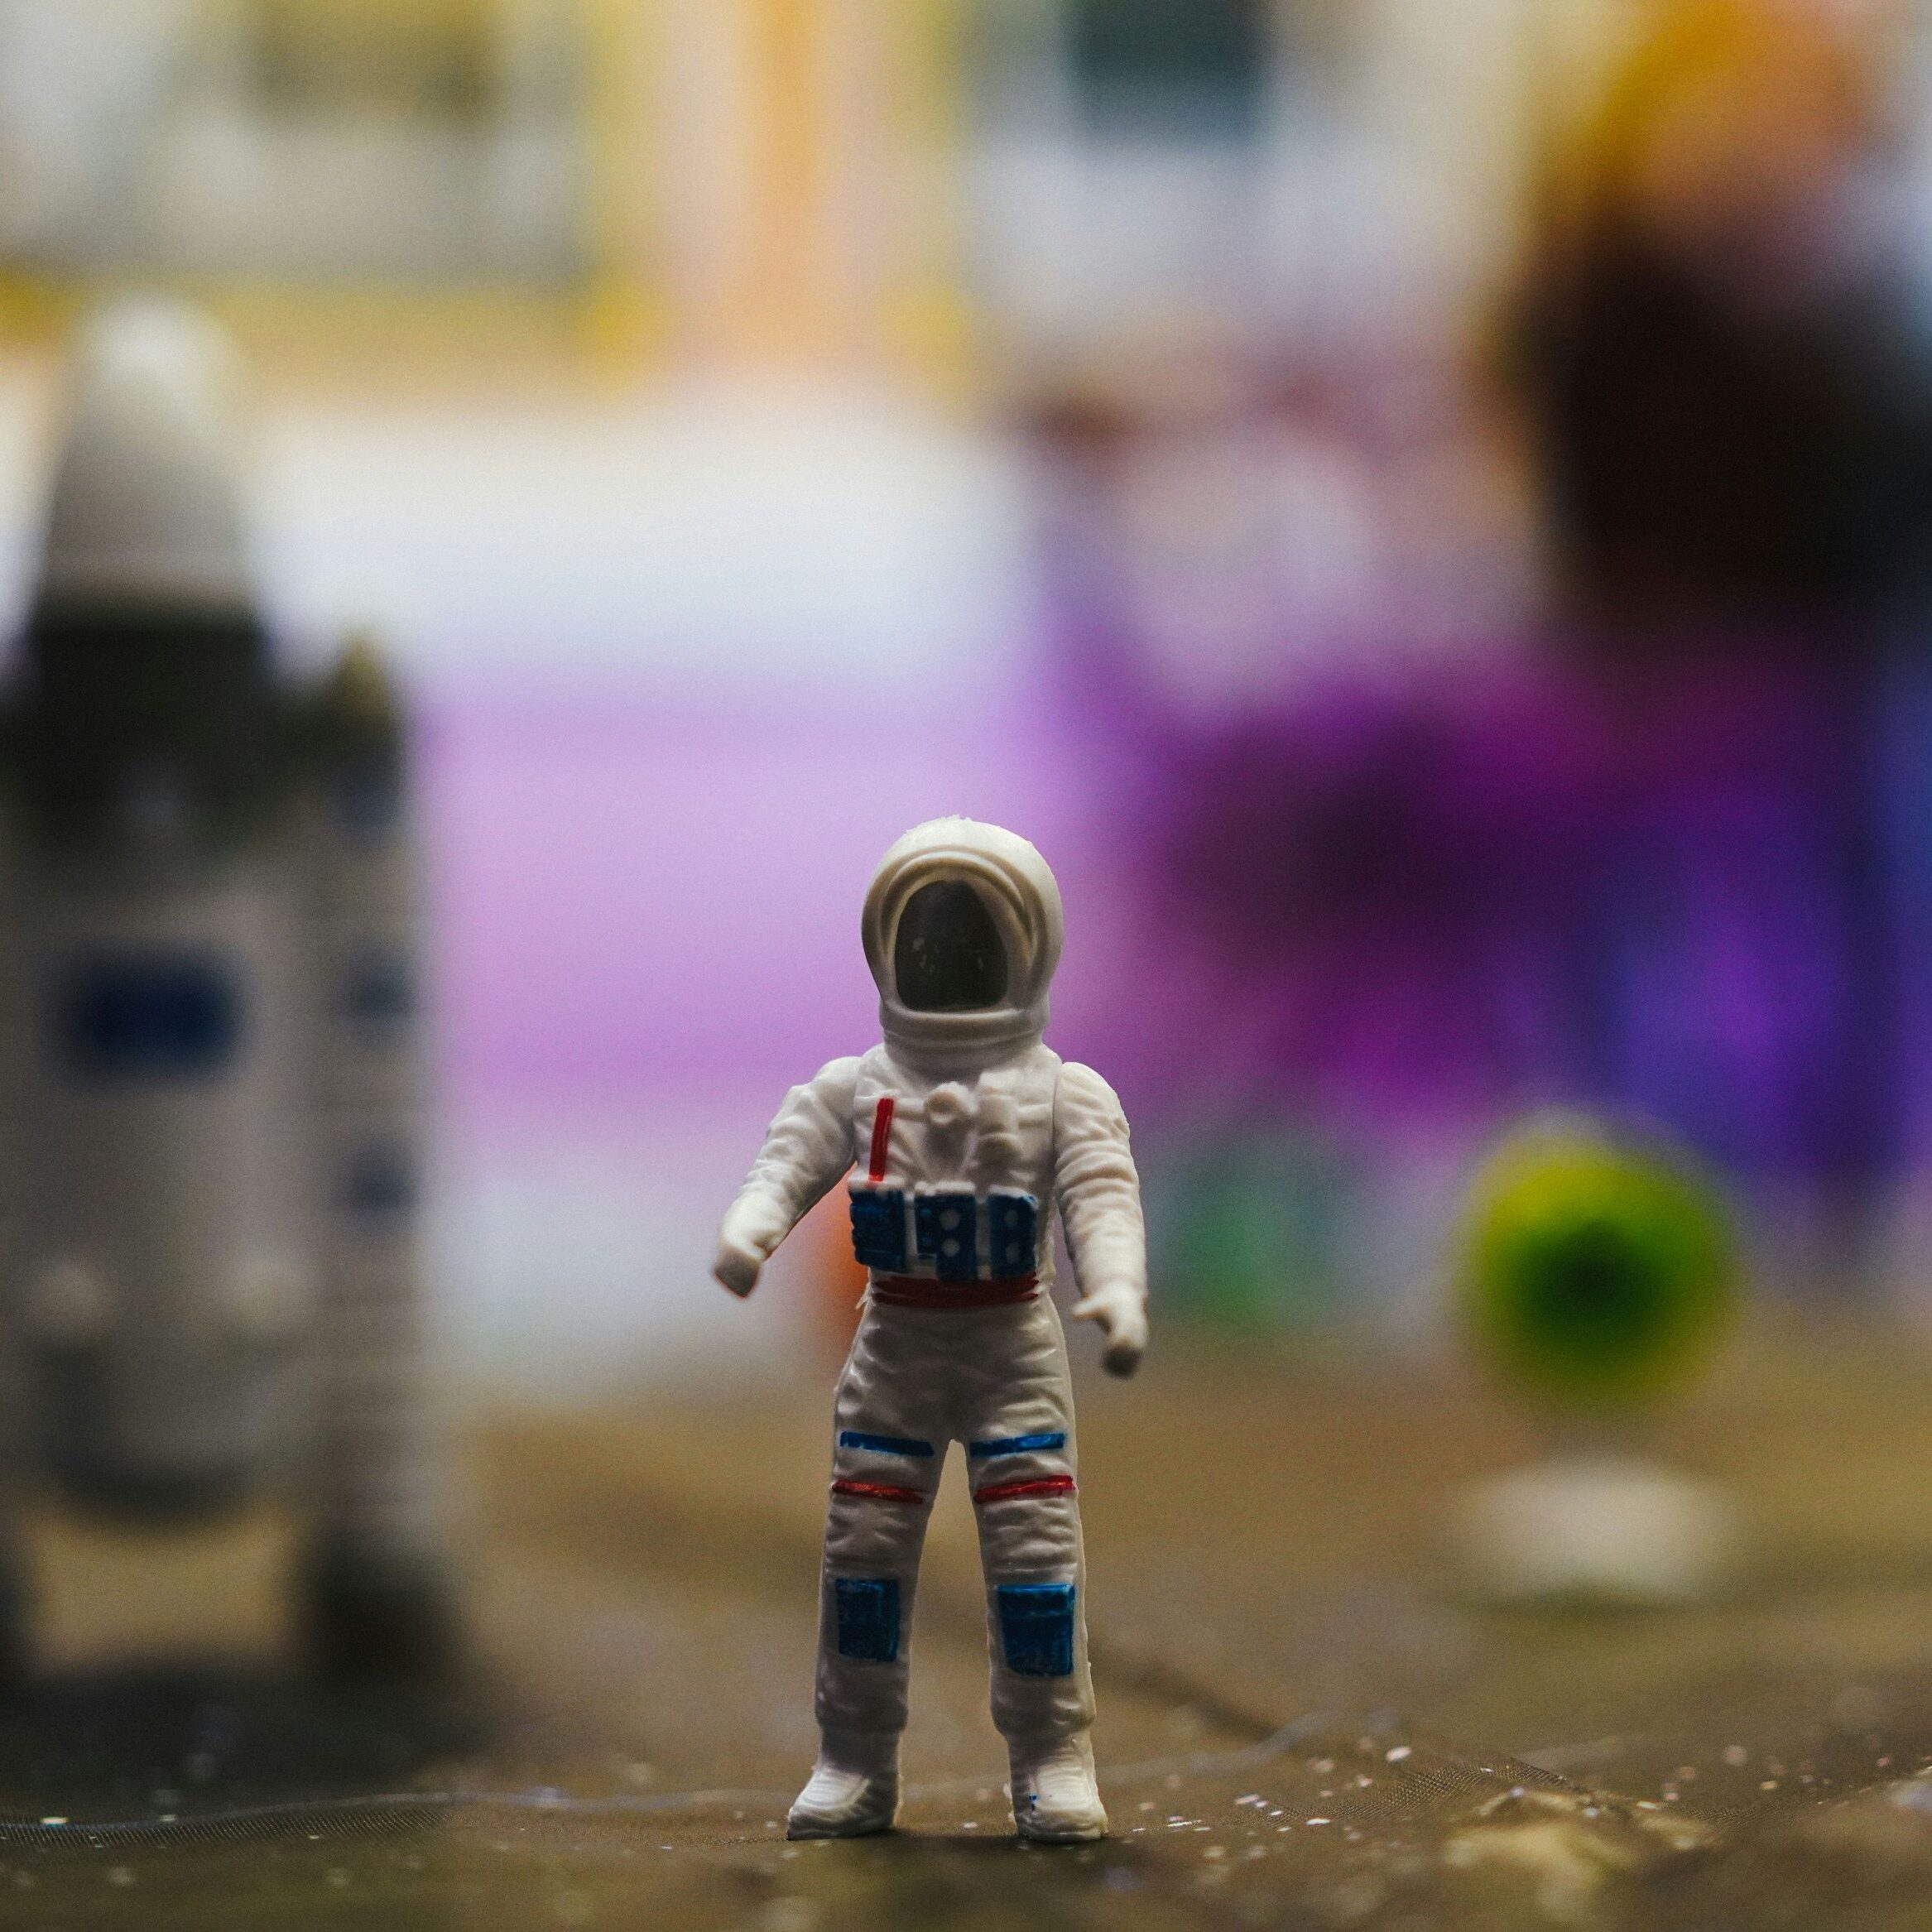 Miniature astronaut doll with a space shuttle in the background at the Planetarium.